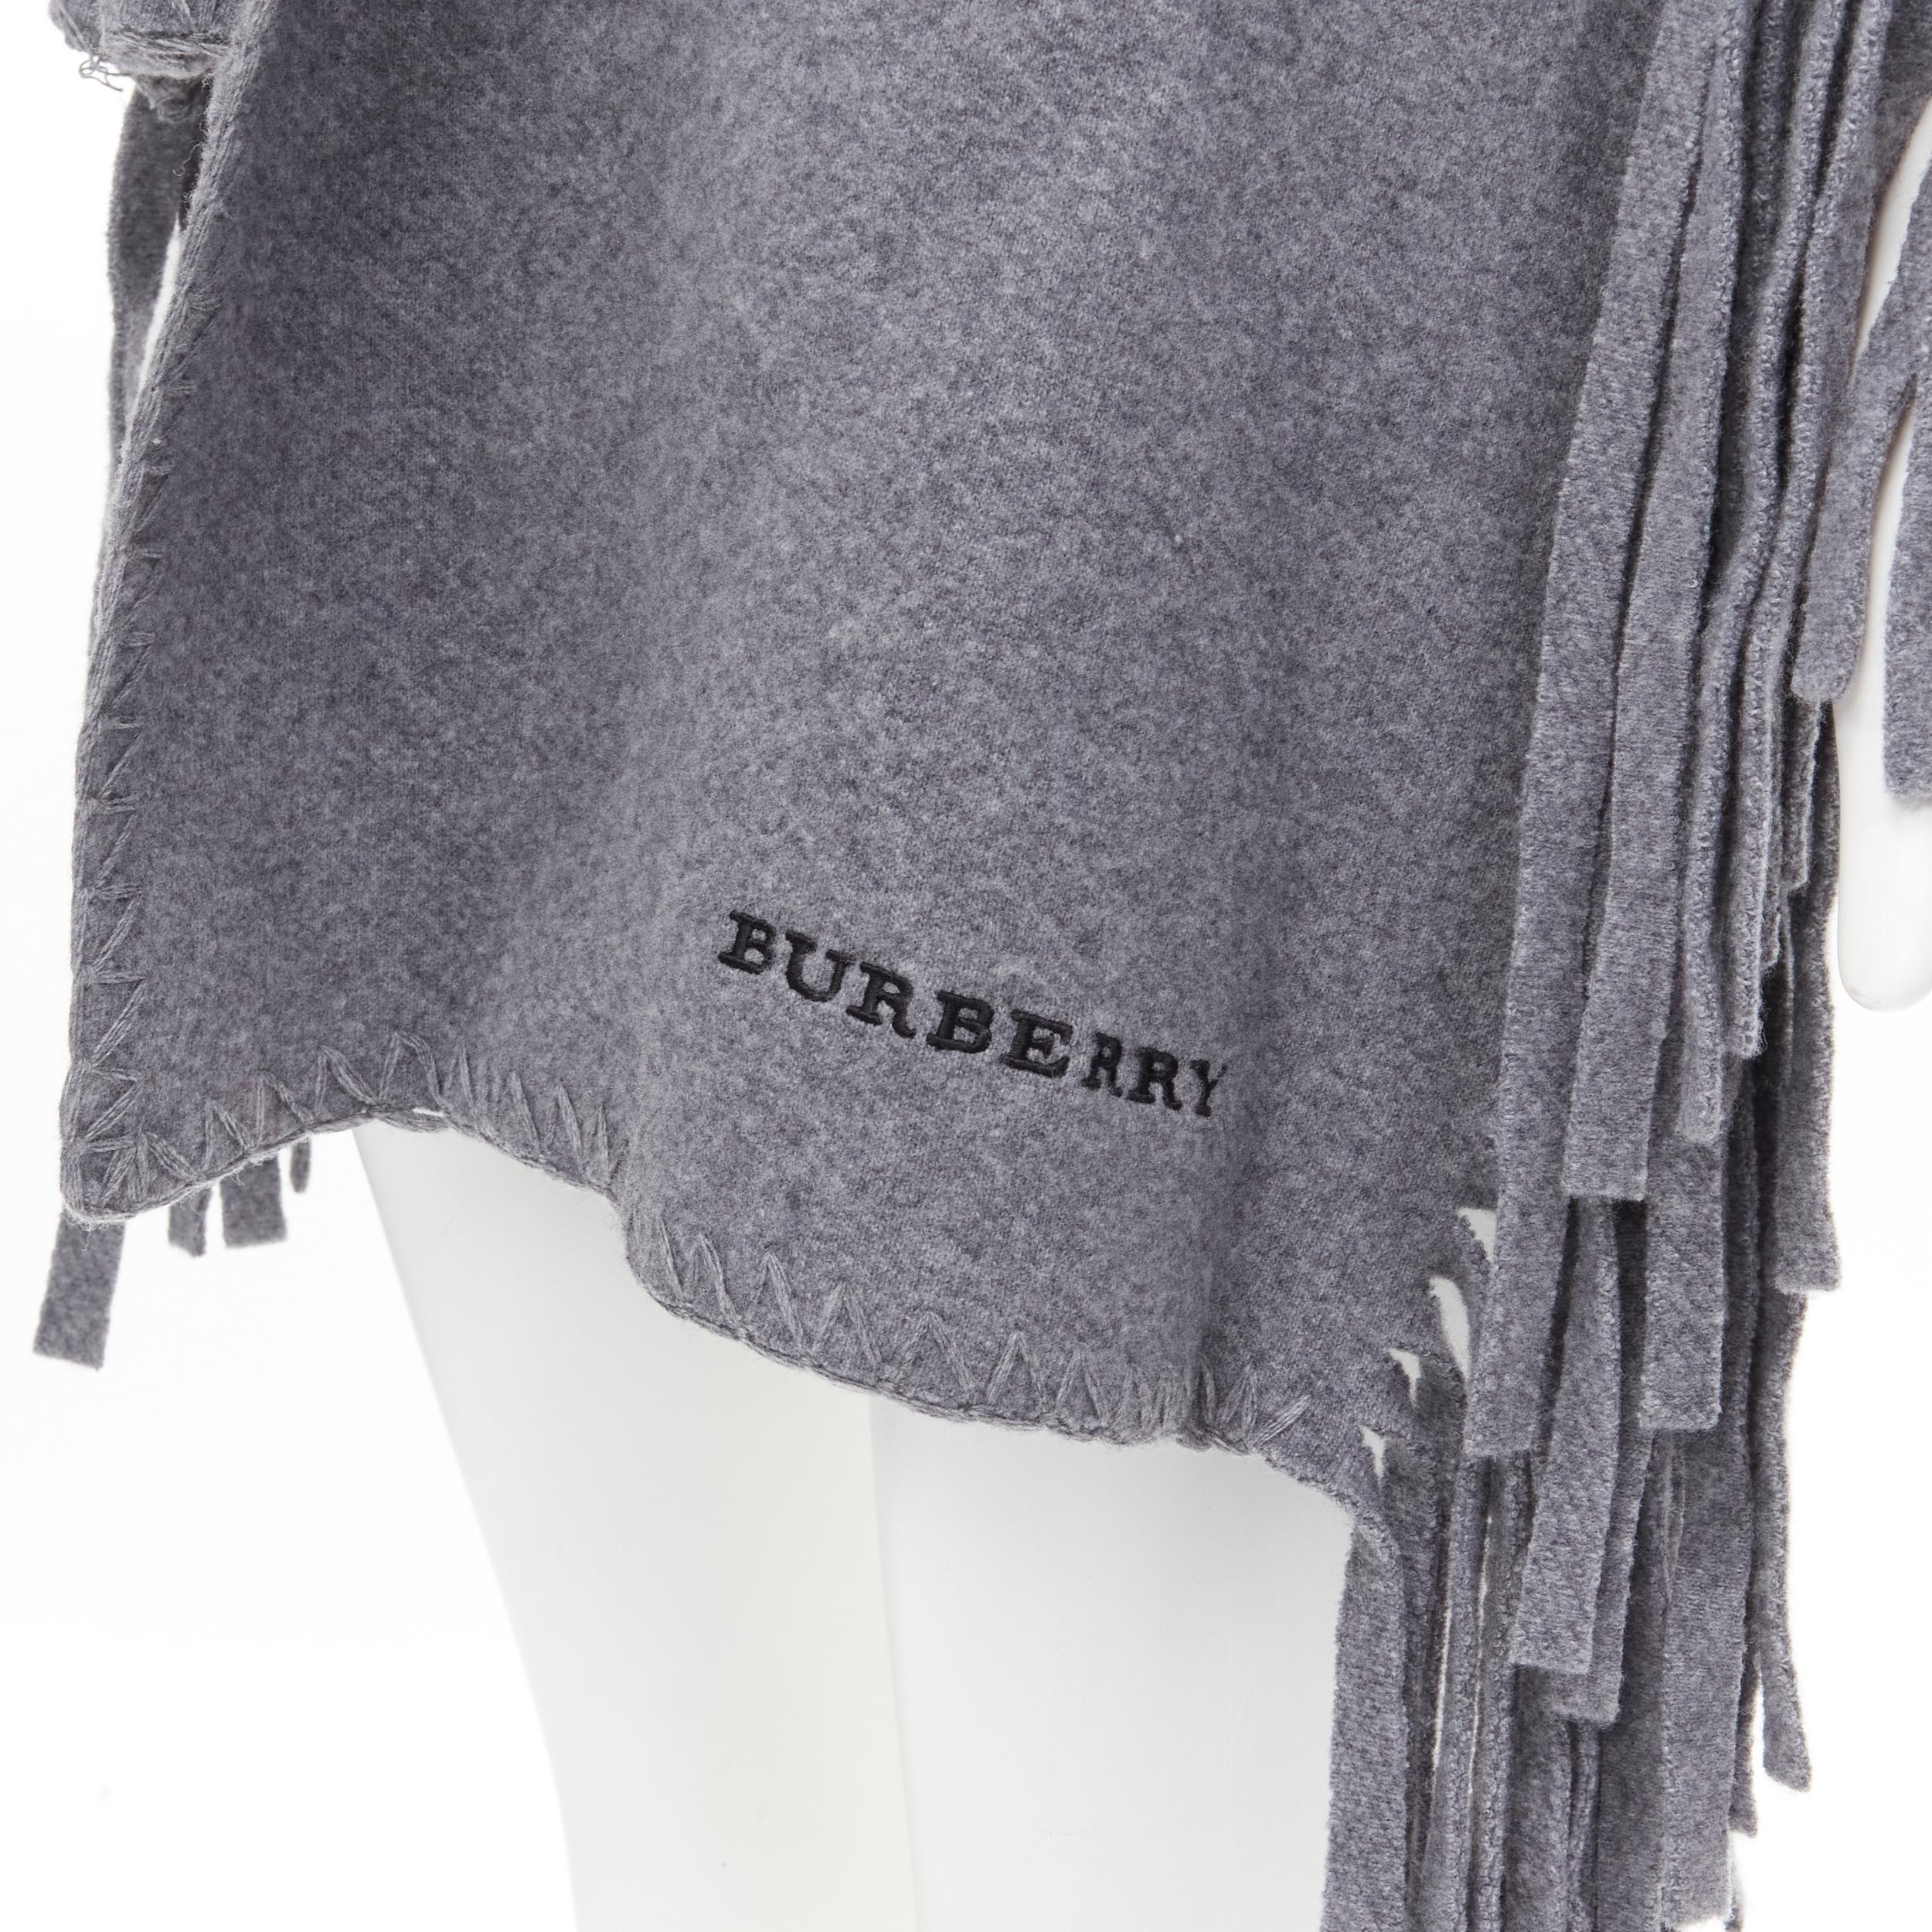 new Burberry wool cashmere mid grey solid felted fringe knitted overstitching detail scarf 
Référence : MELK/A00116 
Marque : Burberry 
MATERIAL : Laine 
Couleur : Gris 
Motif : Solide 
Fabriqué en : Italie 

CONDITION : 
Condit : Neuf avec